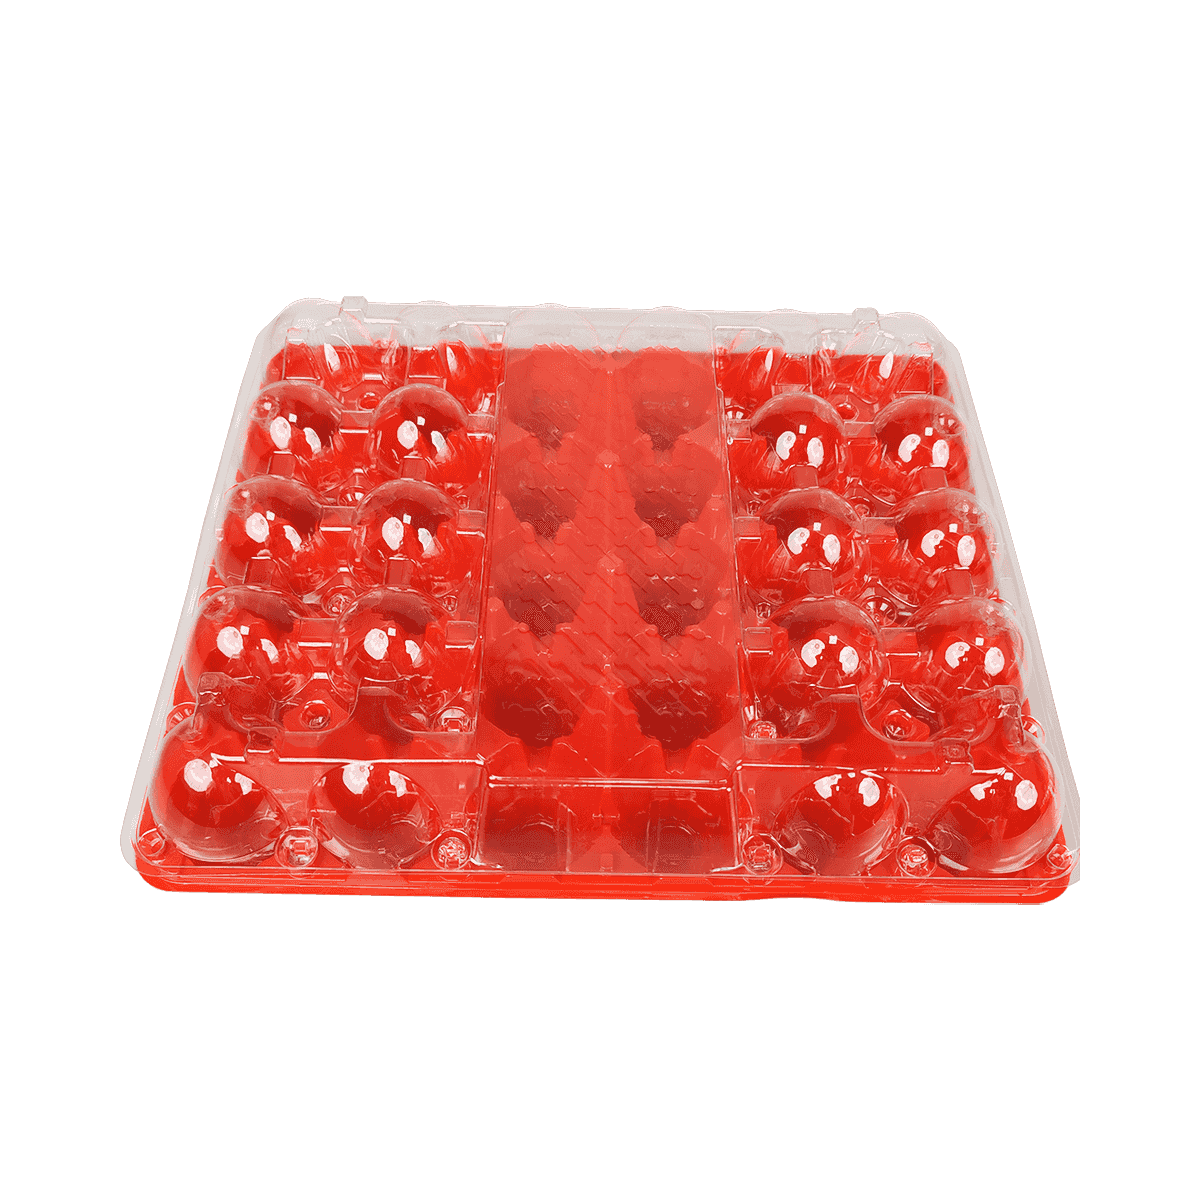 Environmentally friendly colorful chassis with transparent cover PET 30 egg cartons to protect eggs